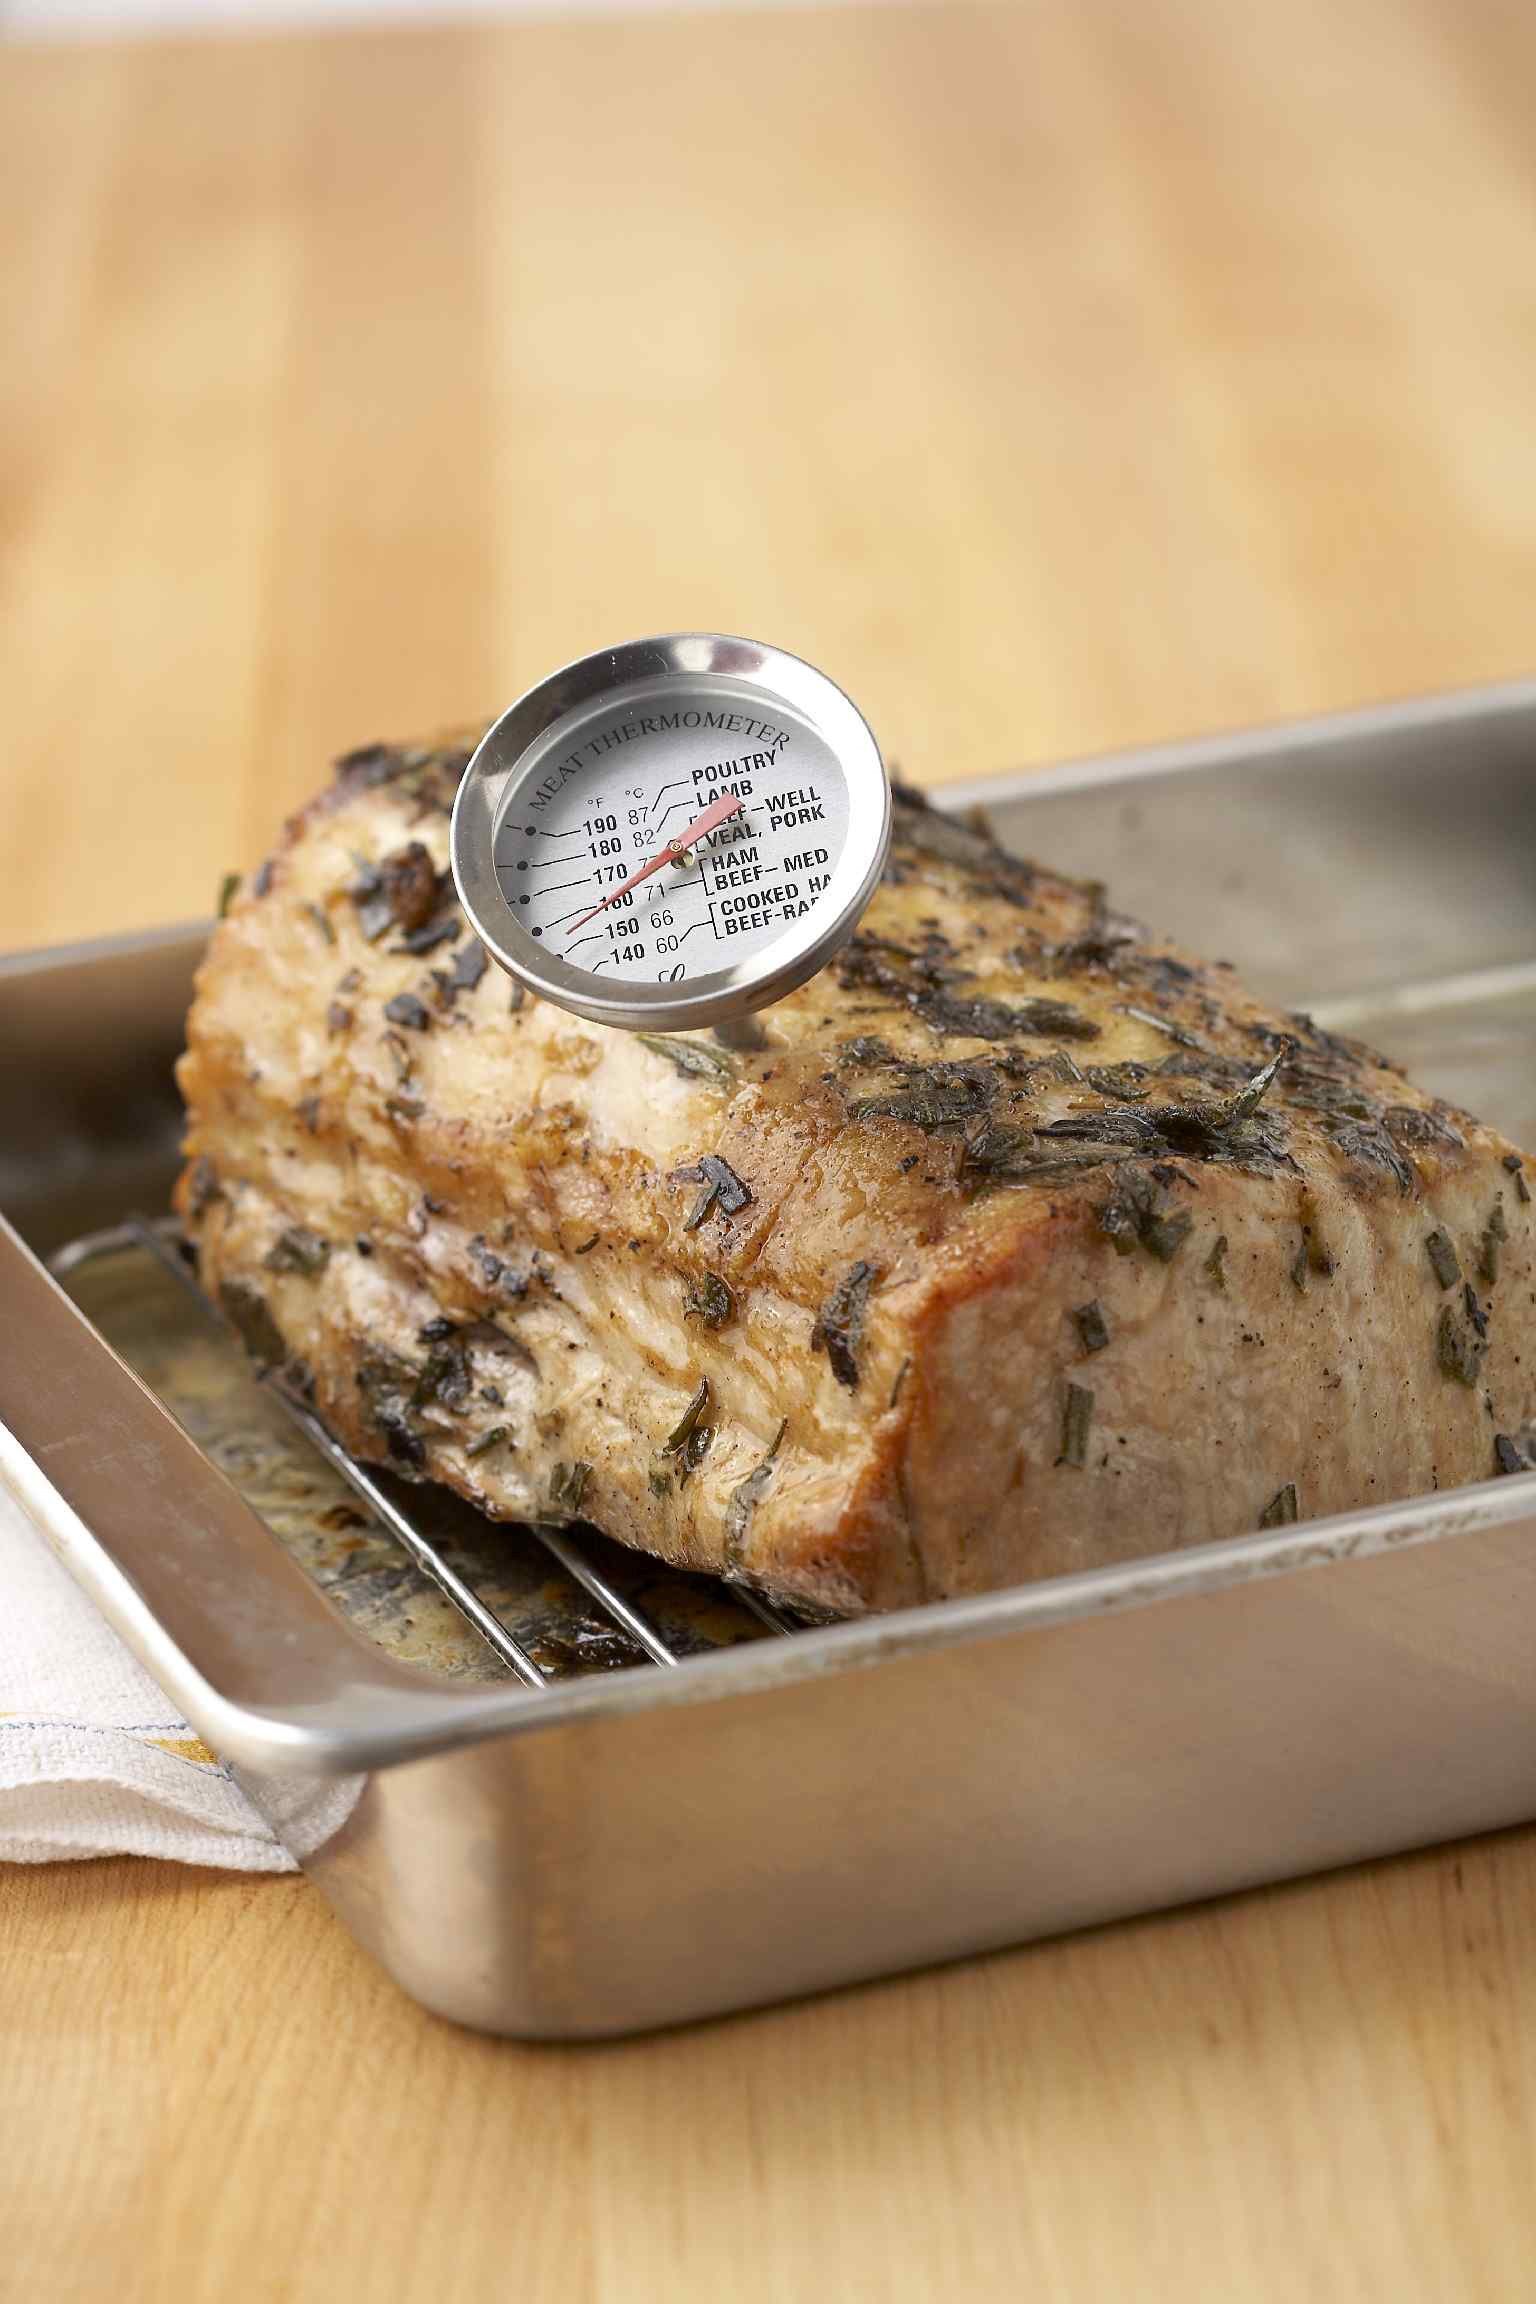 Can You Put a Meat Thermometer in the Oven